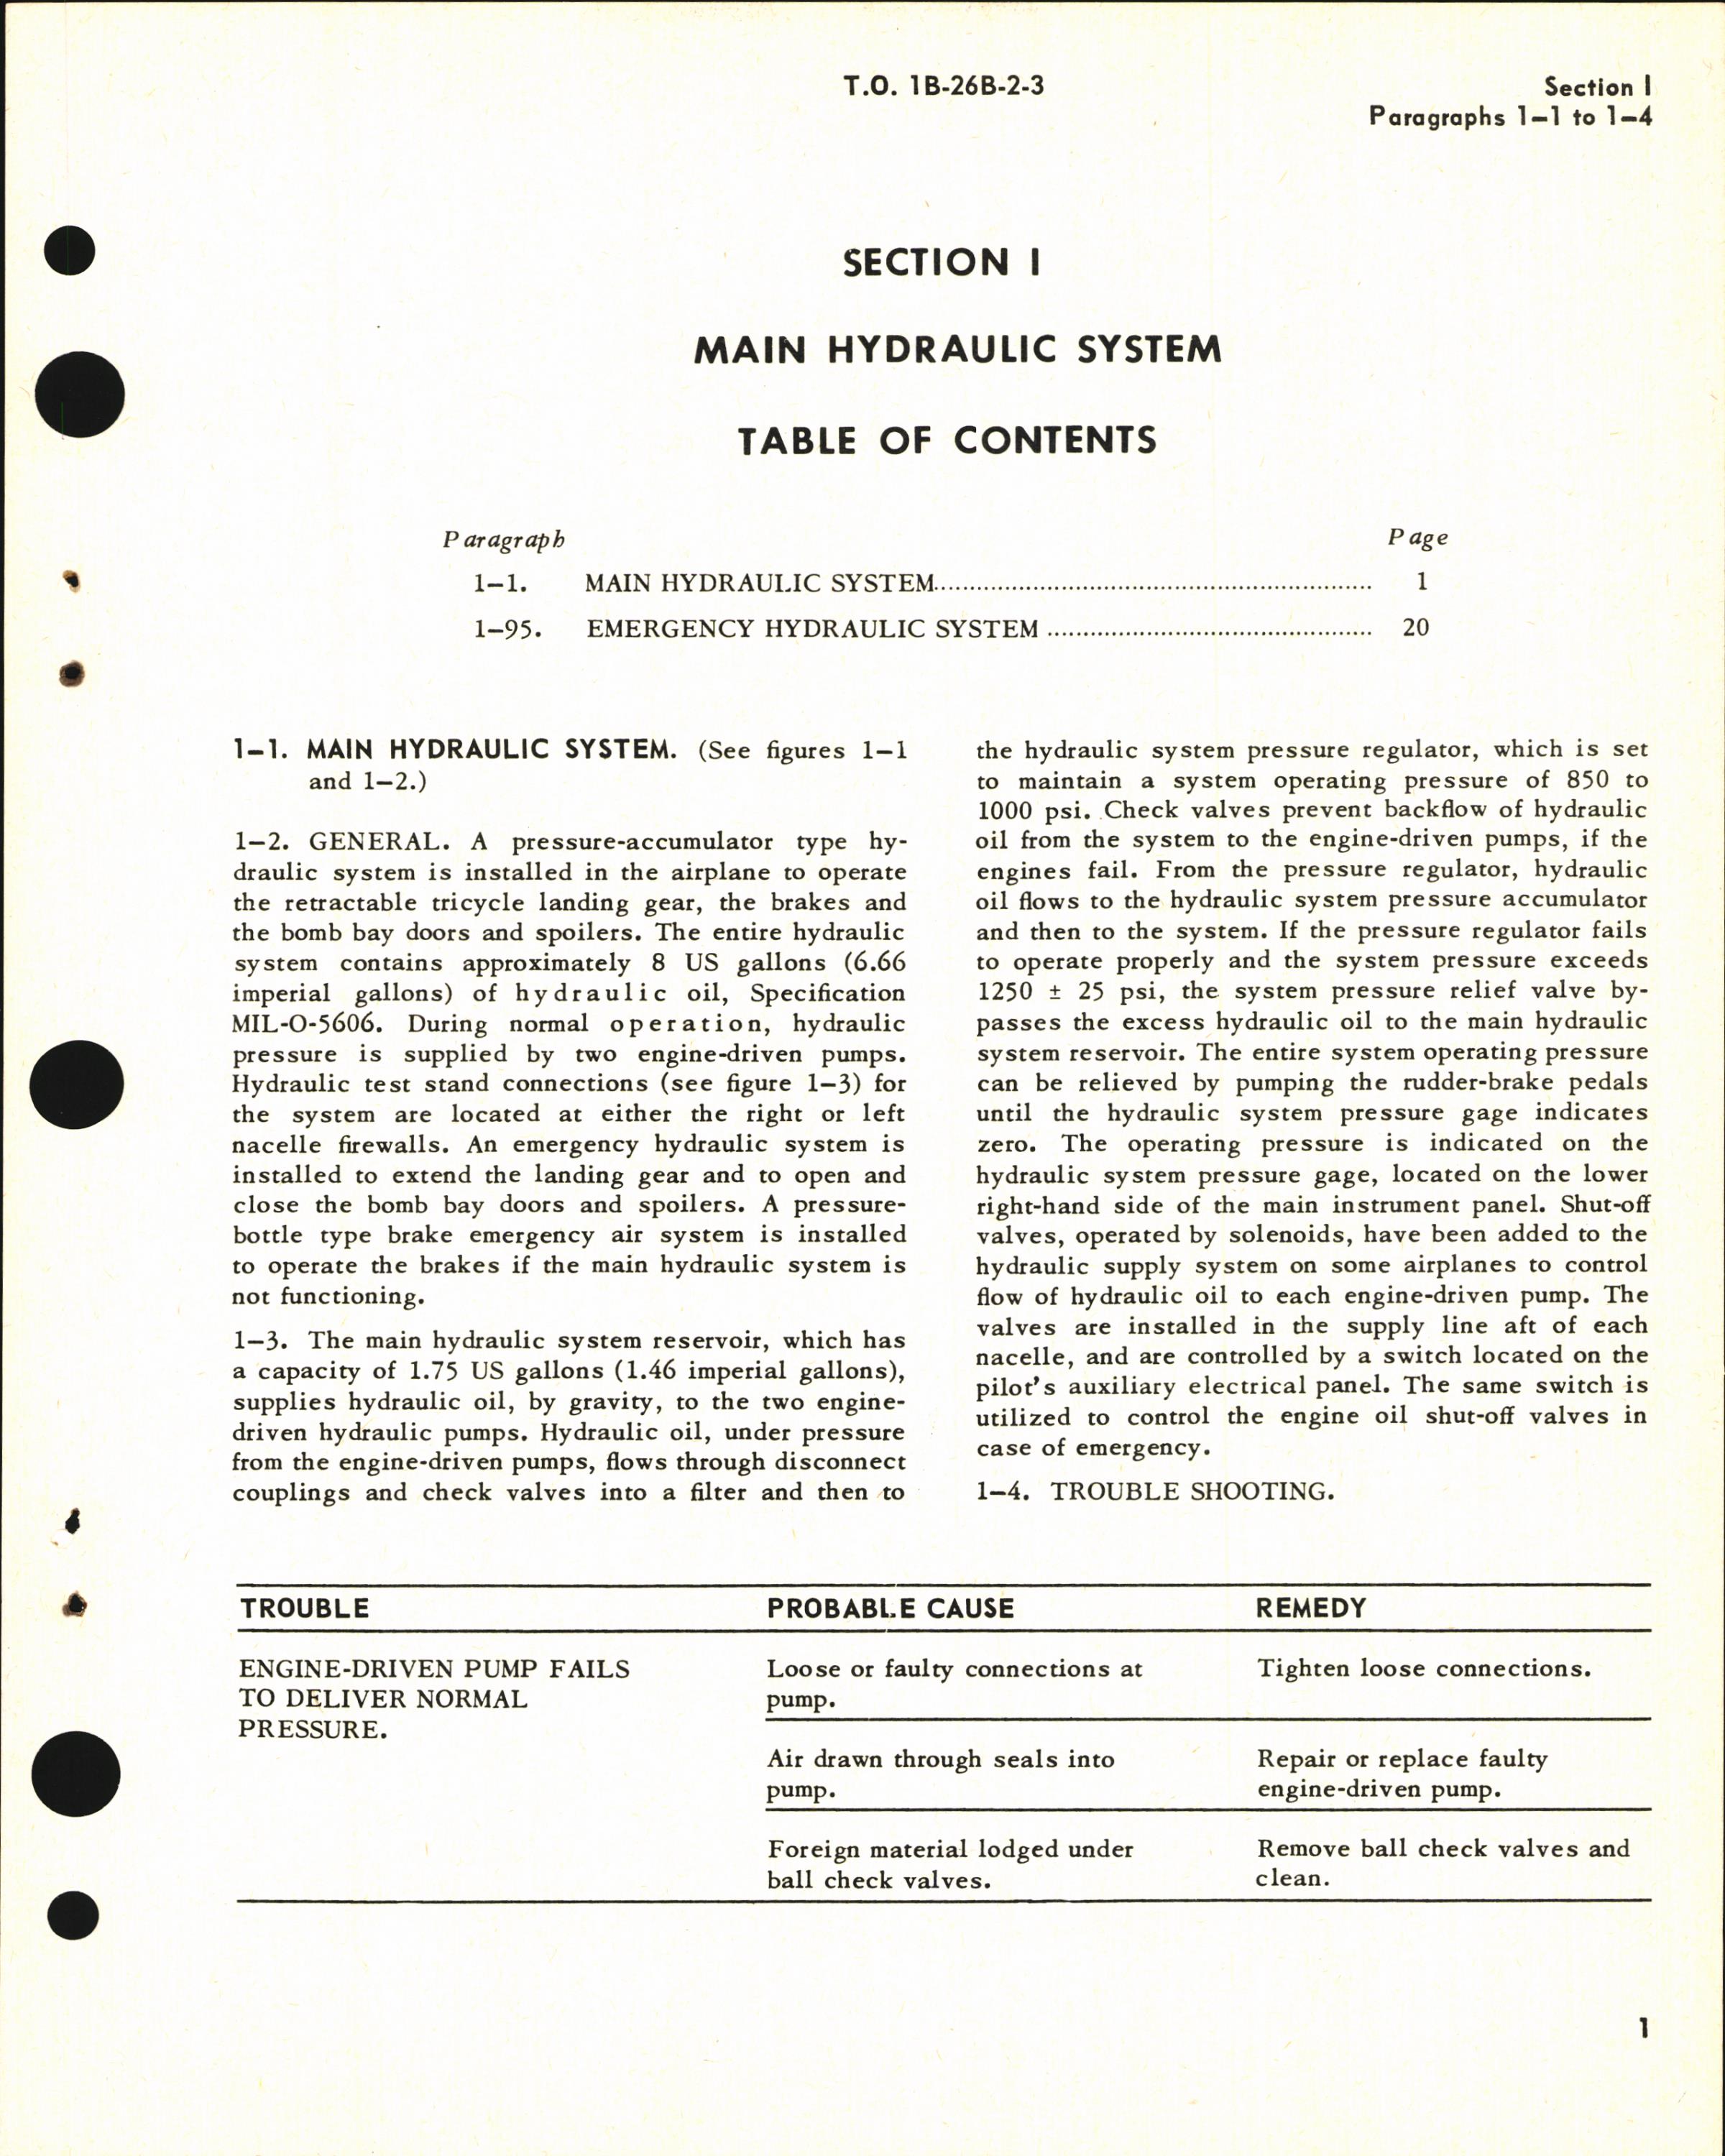 Sample page 7 from AirCorps Library document: Maintenance Instructions for B-26B, B-26C, TB-26B, TB-26C, and JD-1 - Hydraulically Operated Systems